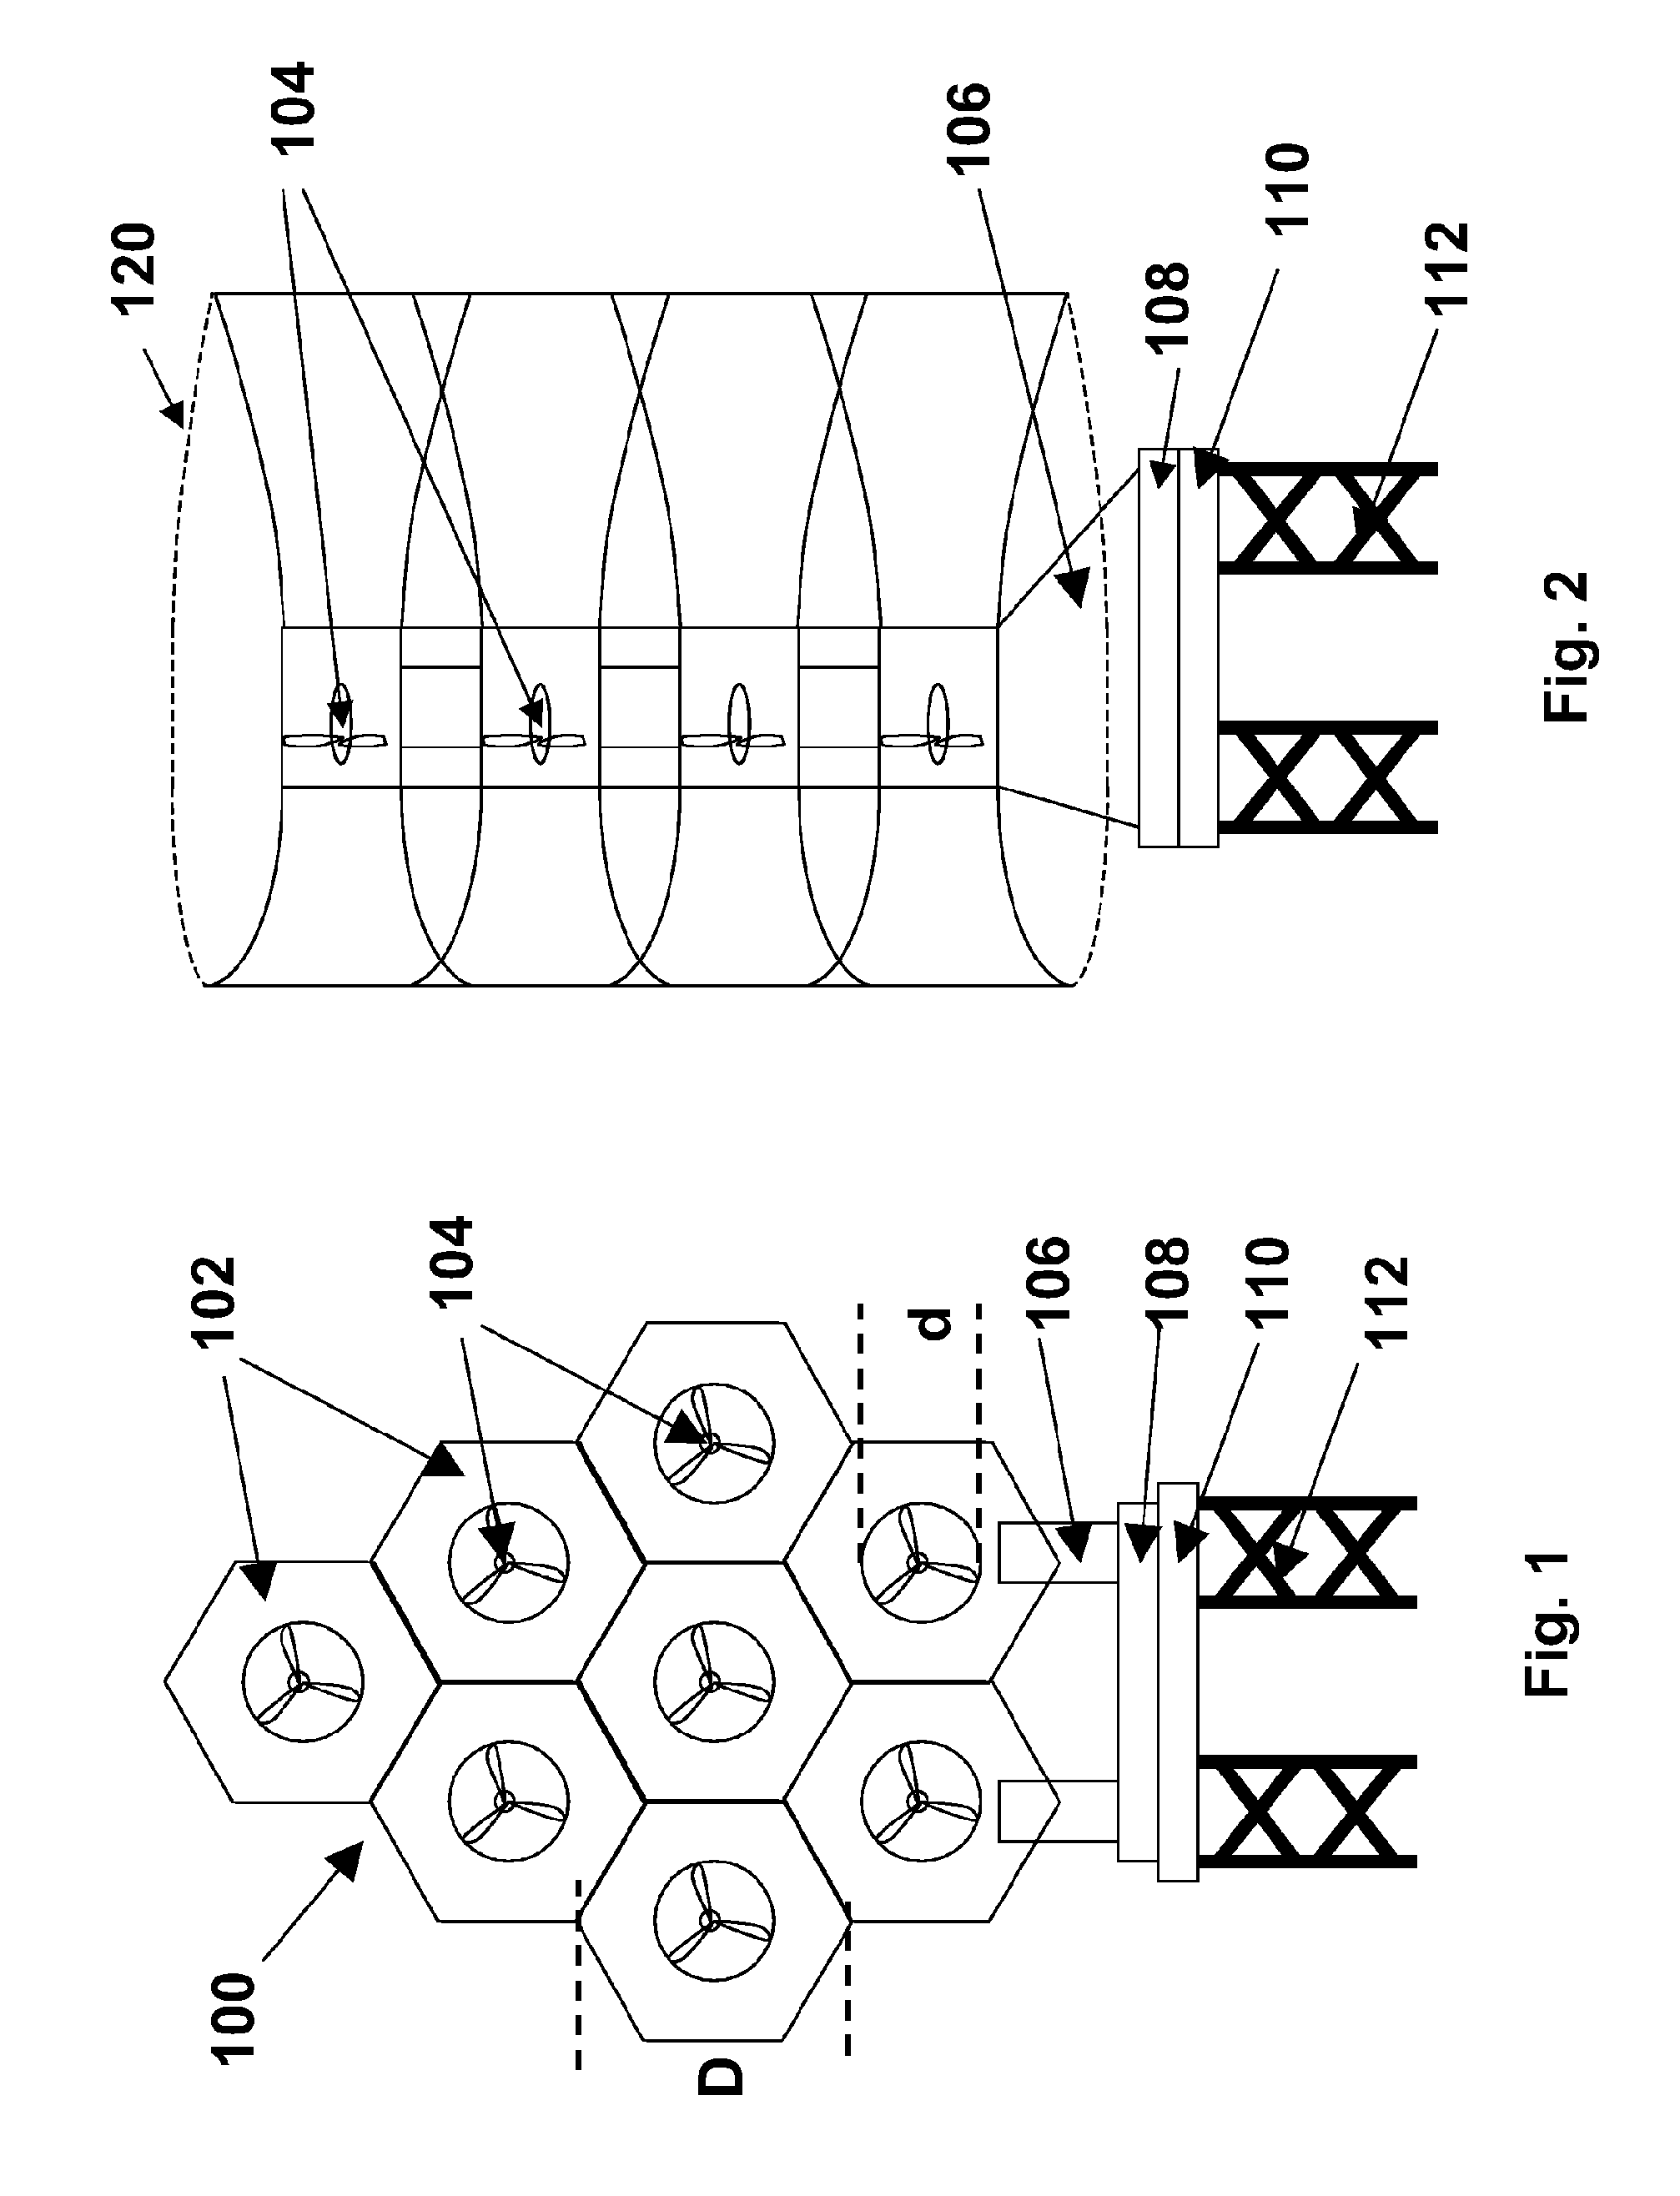 Power generation assemblies, and apparatus for use therewith